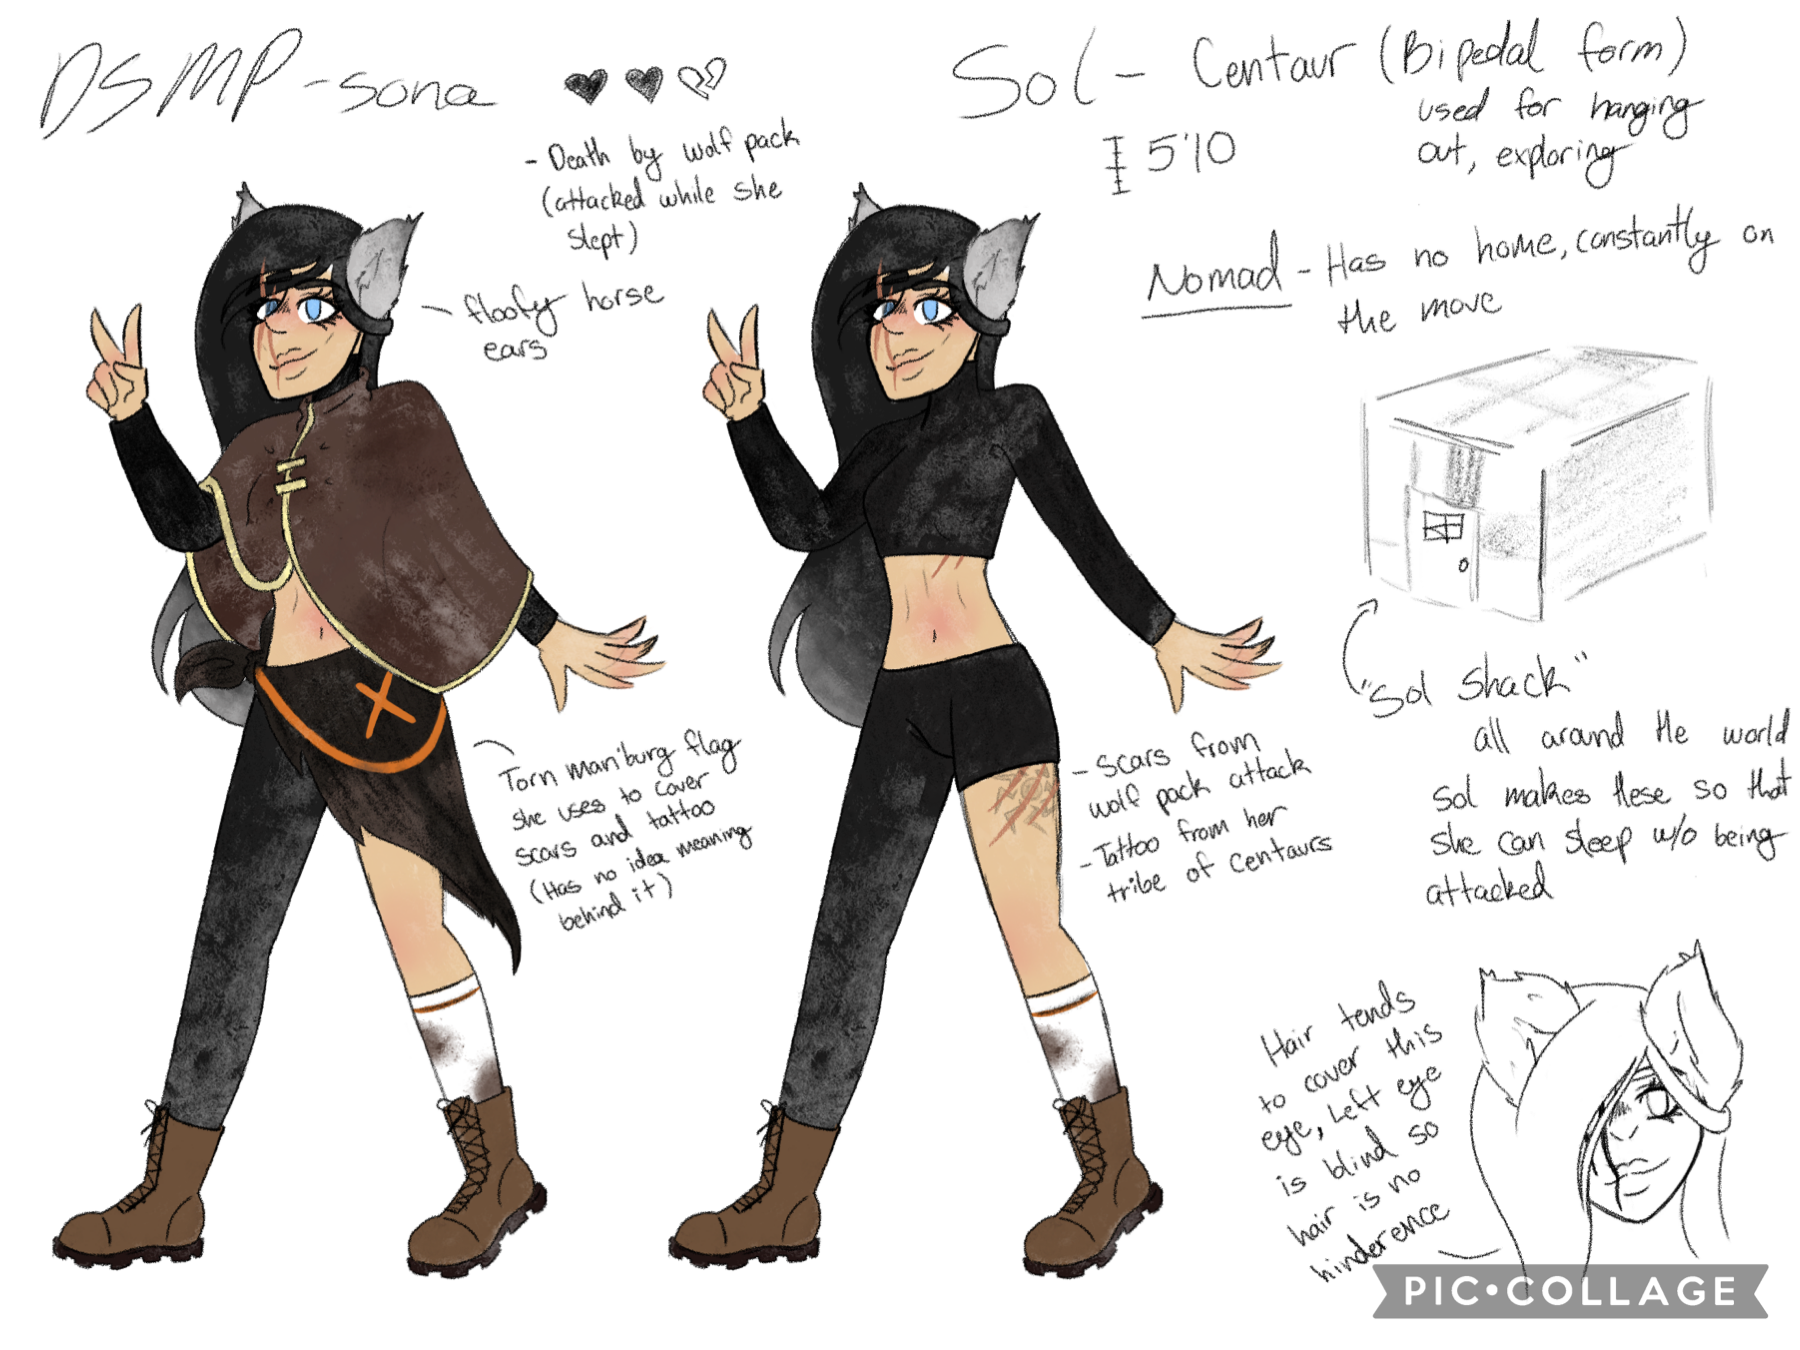 DSMP sona trend thing going around Twitter so I wanted to make one ☺️
I’m working on her centaur form now 😤❤️